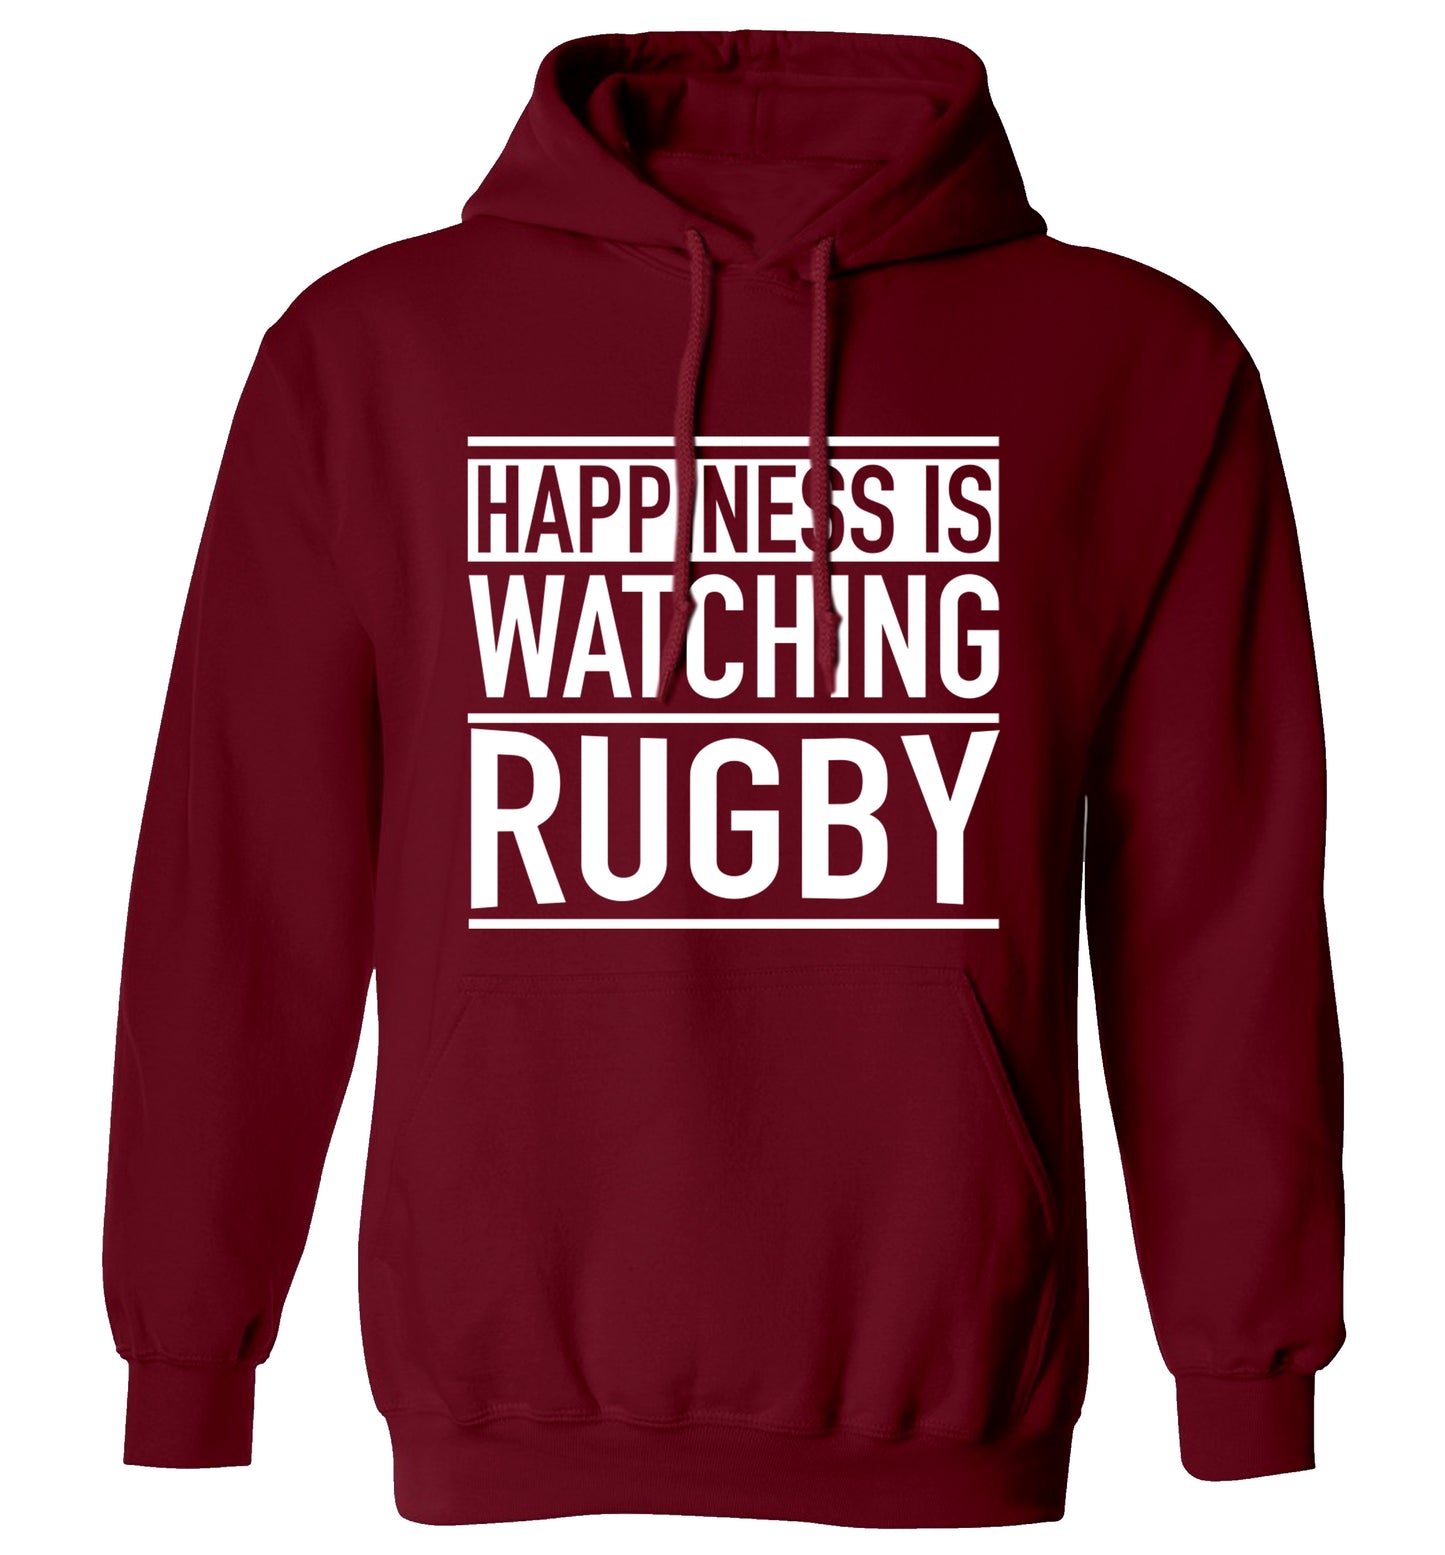 Happiness is watching rugby adults unisex maroon hoodie 2XL